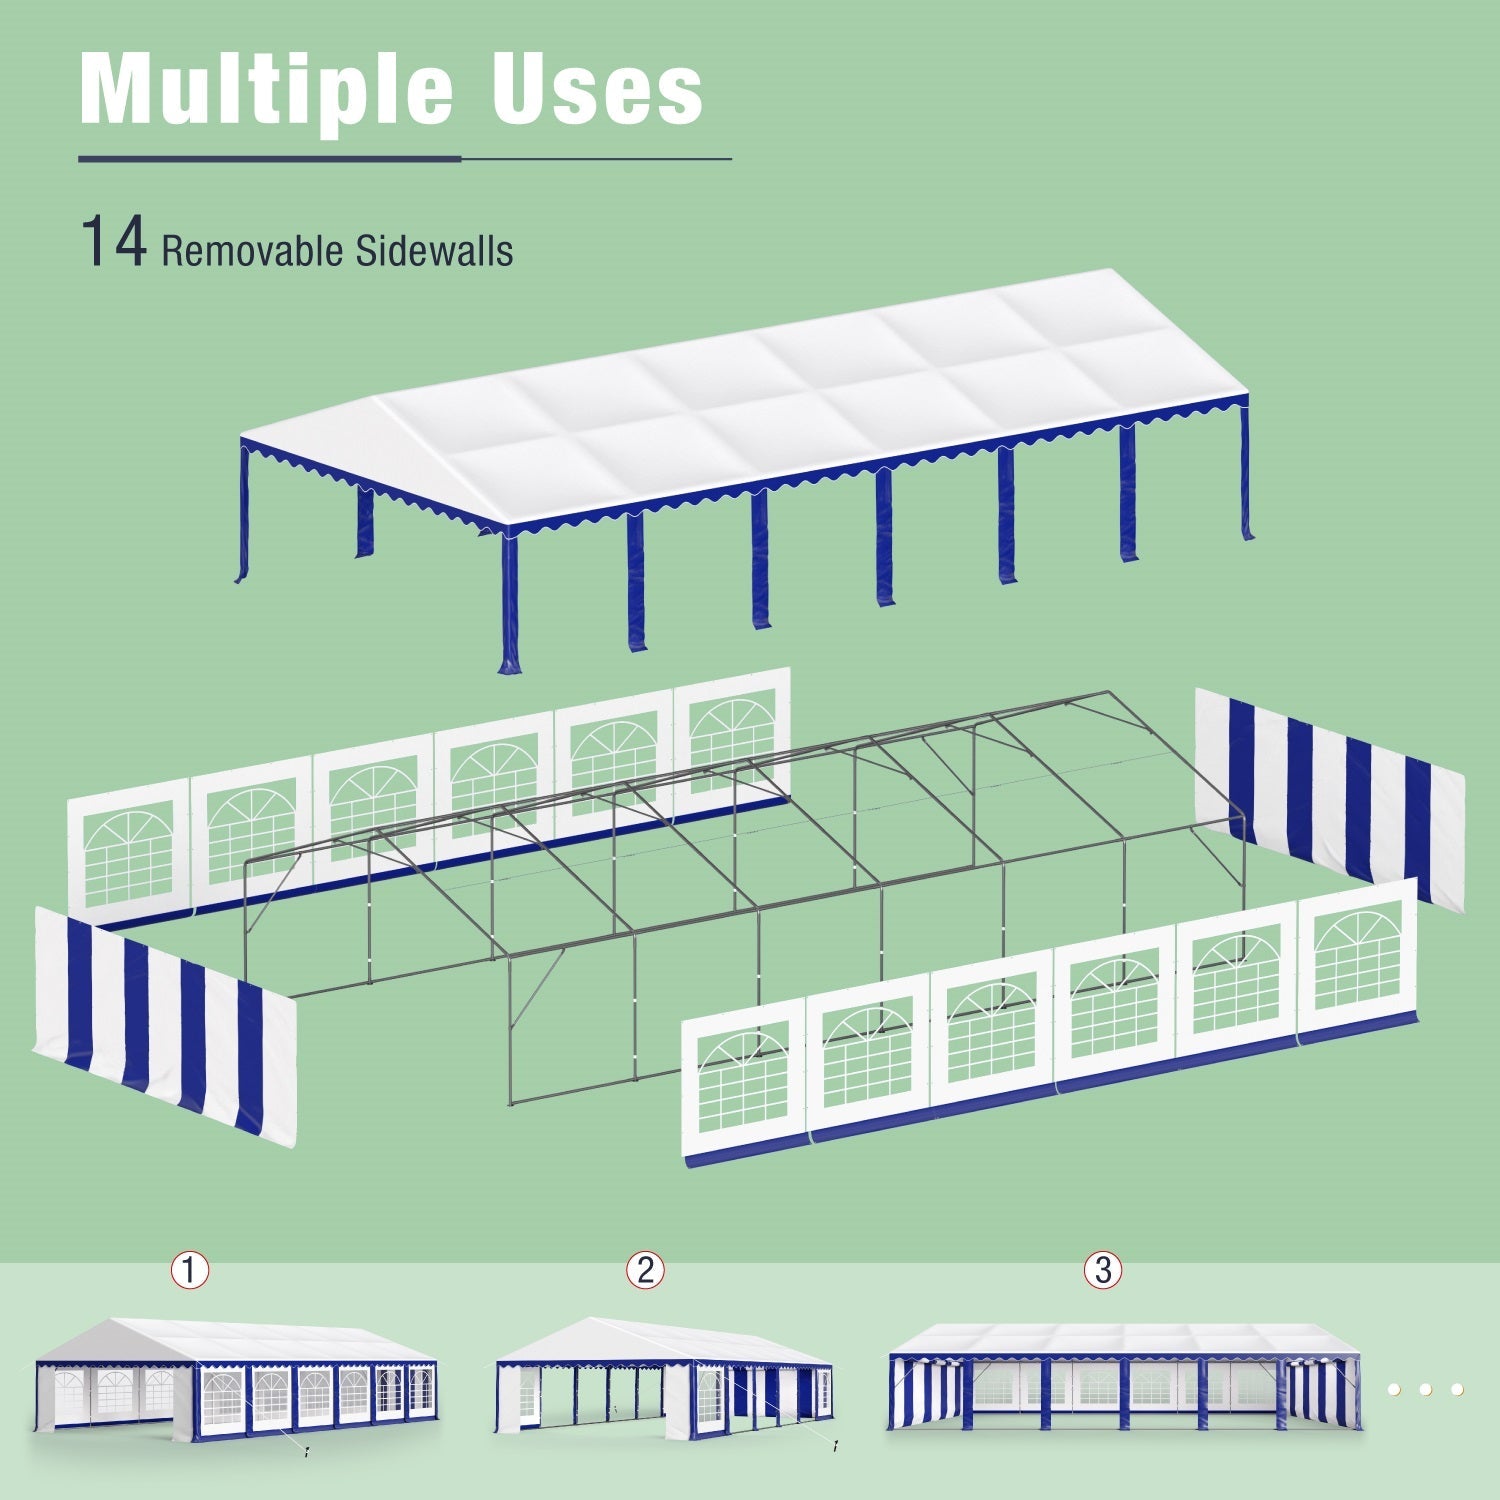 MF Studio 20'X40' Party Tent Outdoor Patio Event Shelter Canopy with 12 Removable Sidewalls, White and Blue